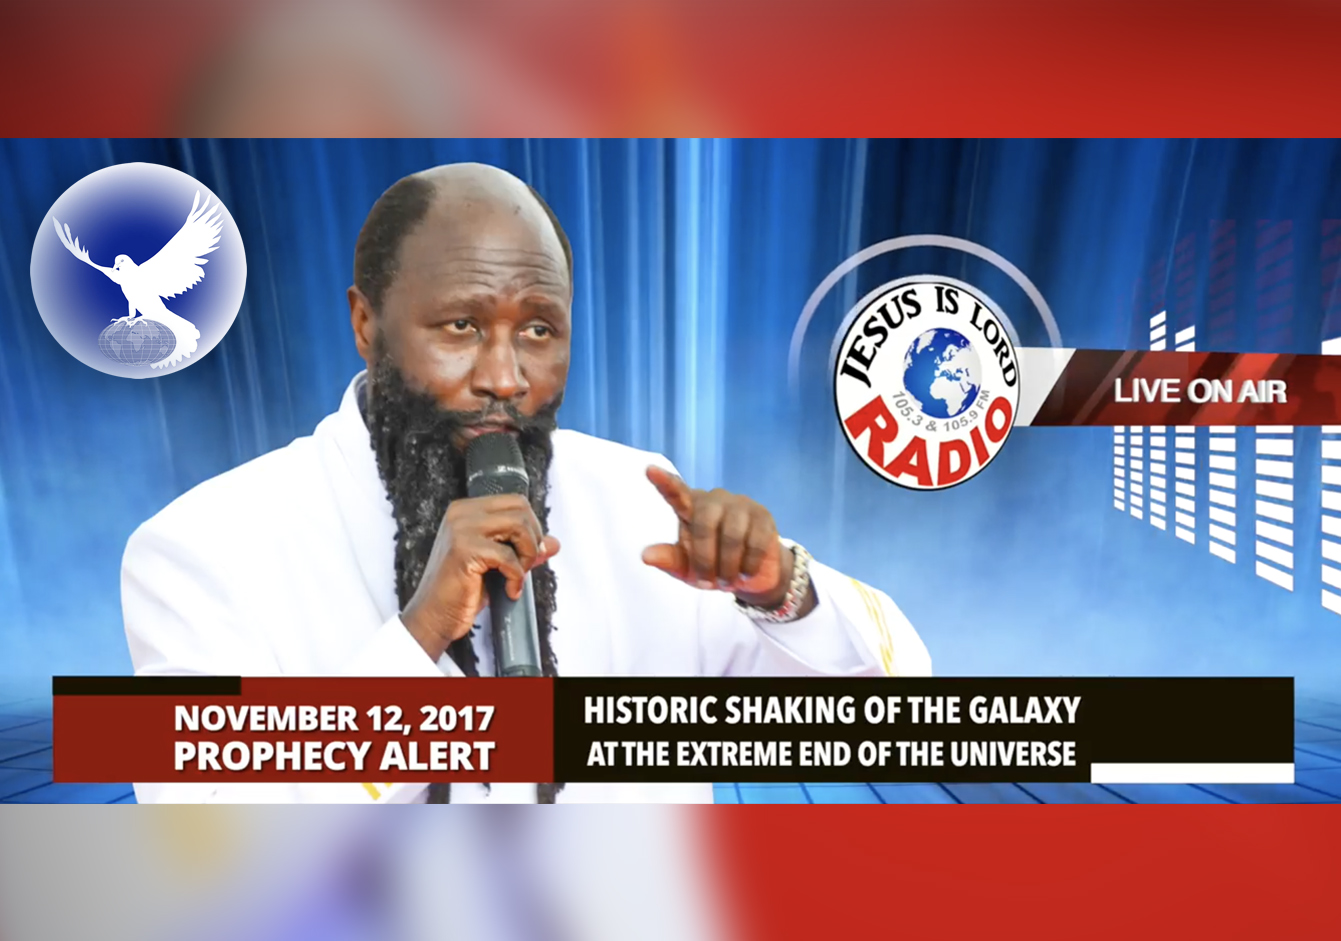 EPISODE 29 - PROPHECY OF THE HISTORIC SHAKING OF THE GALAXY AT THE EXTREME END OF THE UNIVERSE (12Nov2017) - PROPHET DR. OWUOR